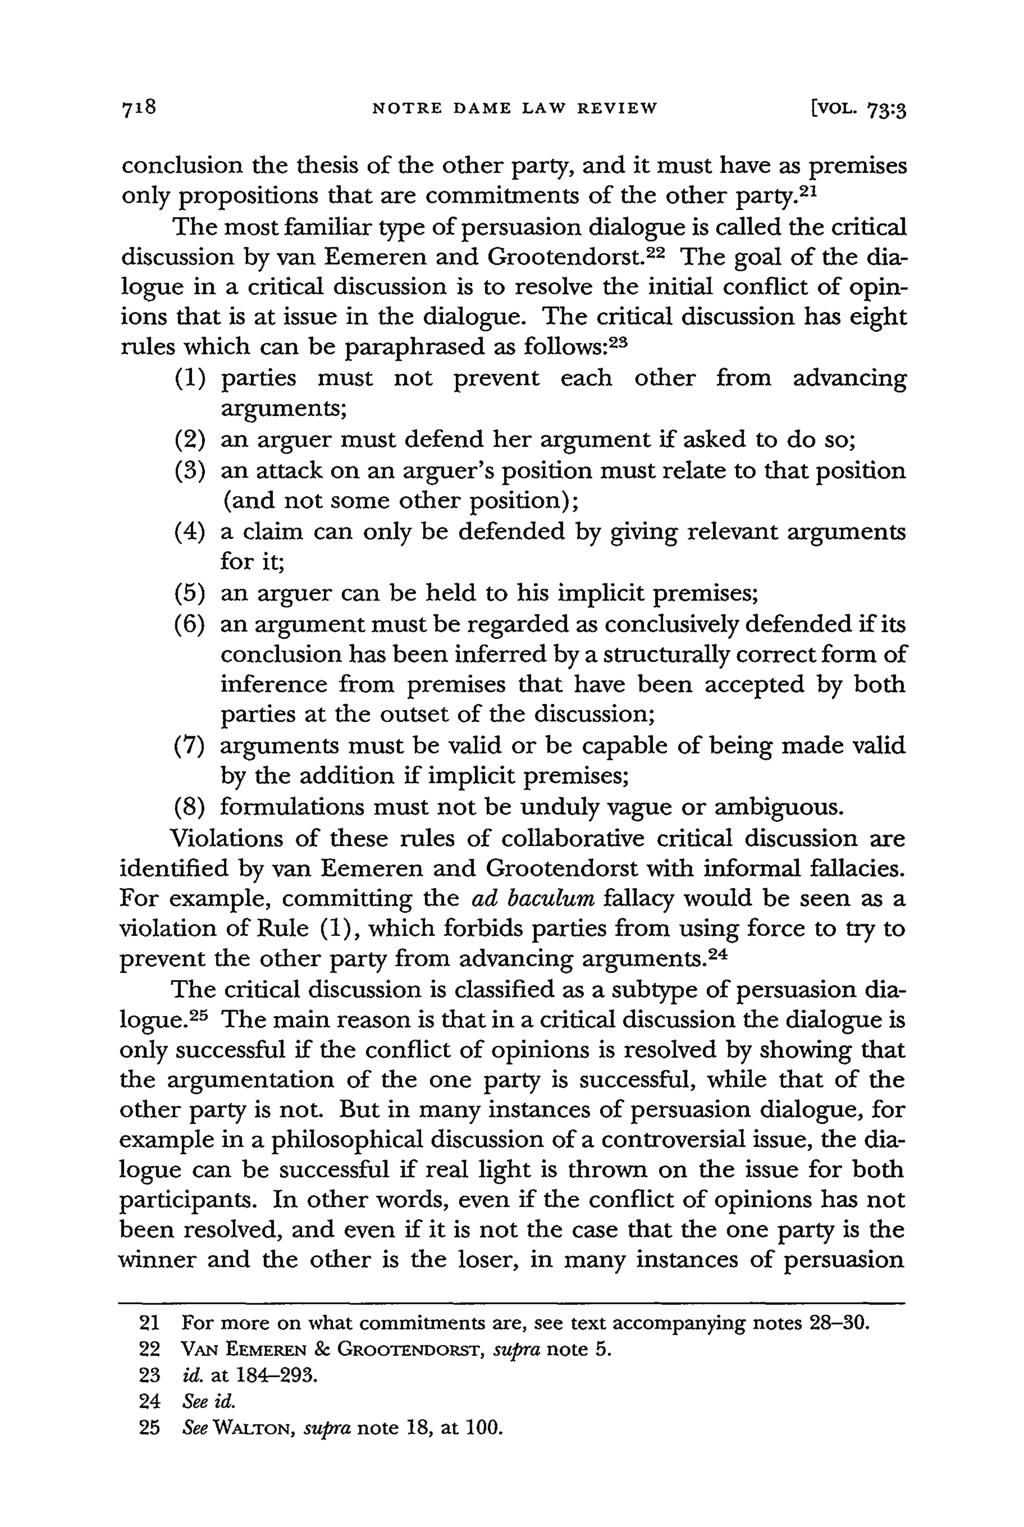 NOTRE DAME LAW REVIEW[O [VOL- 73:3 conclusion the thesis of the other party, and it must have as premises only propositions that are commitments of the other party.